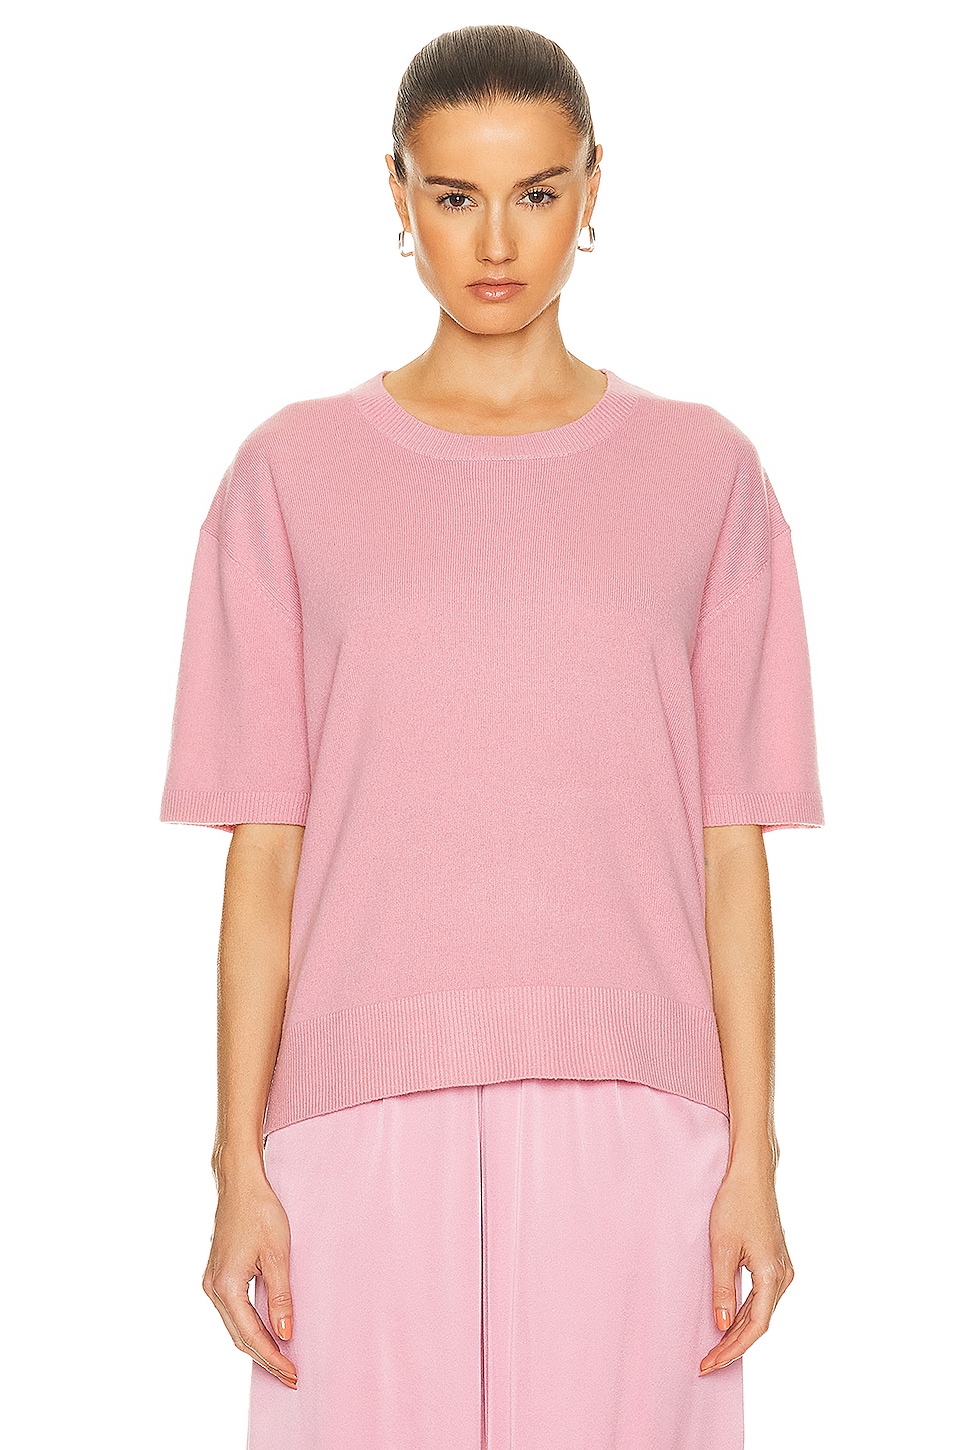 Miller Cashmere Top in Pink